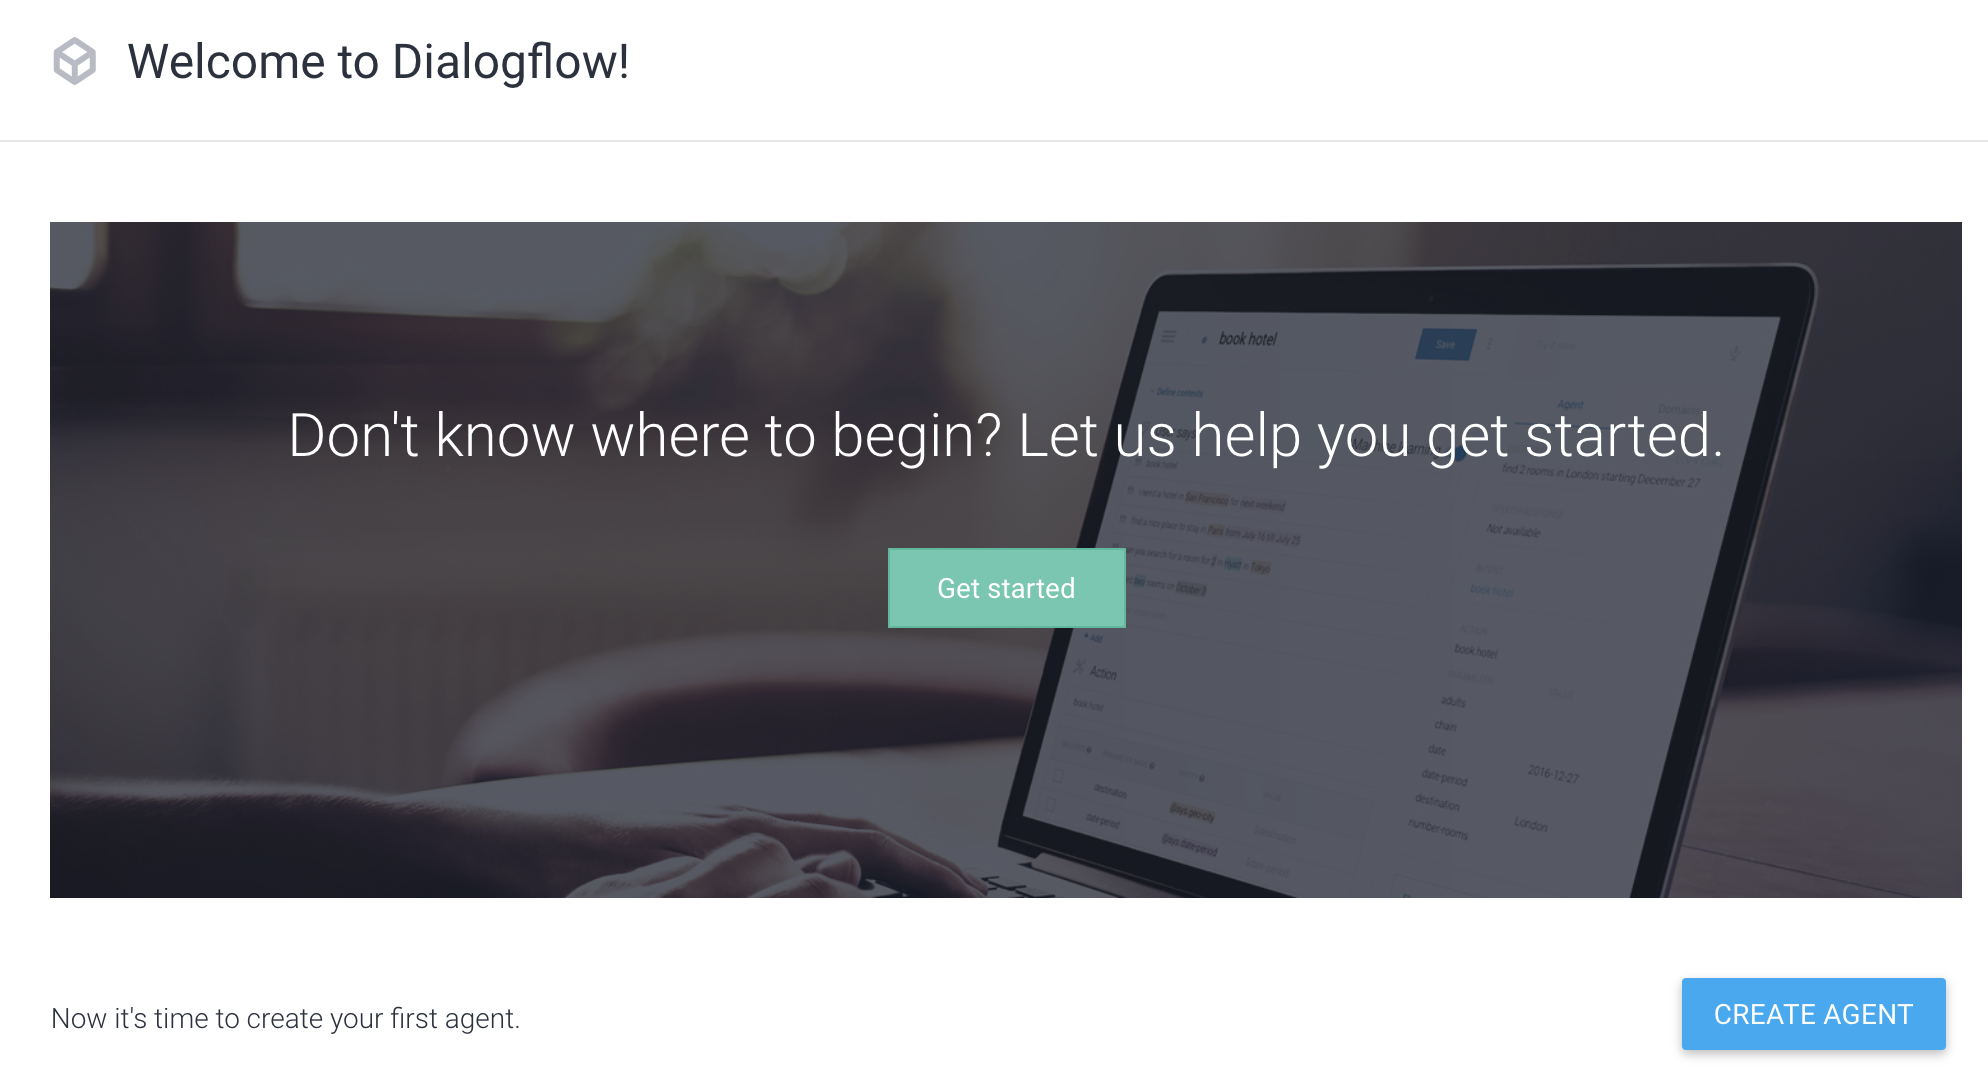 Welcome to Dialogflow page